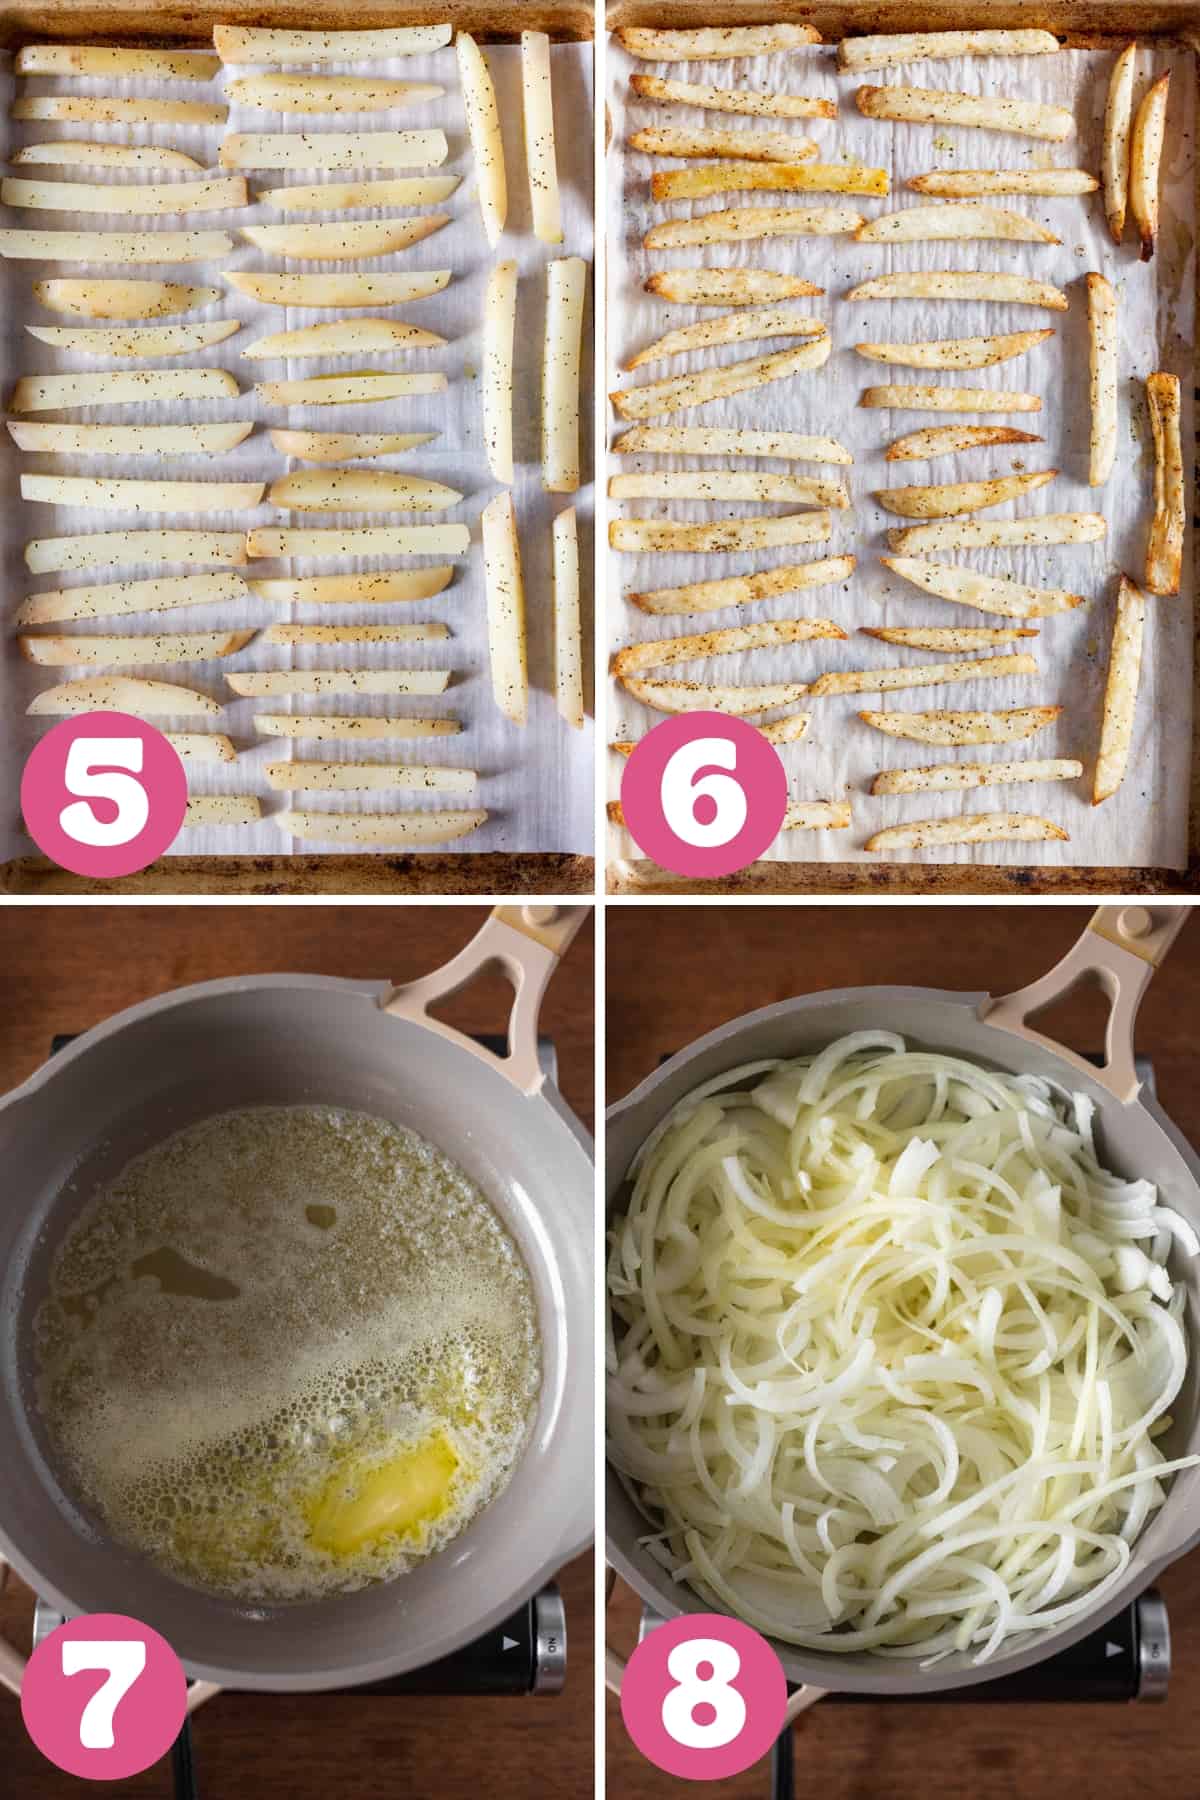 Four images in a collage to show steps 5 through 8 in making french onion fries